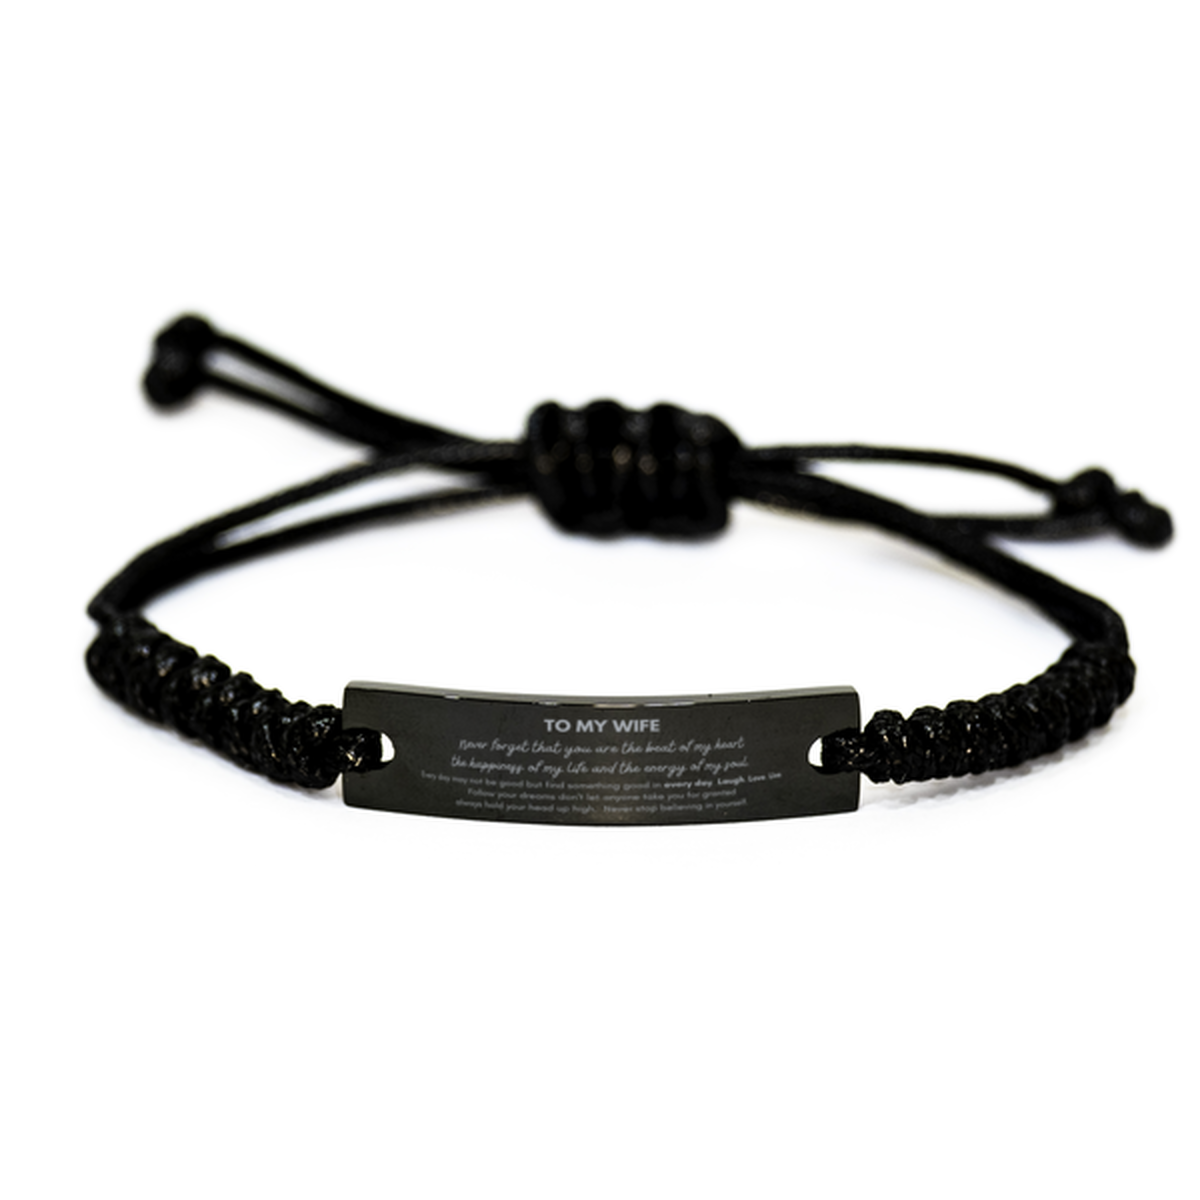 To My Wife Bracelet Gifts, Christmas Wife Black Rope Bracelet Present, Birthday Unique Motivational For Wife, To My Wife Never forget that you are the beat of my heart the happiness of my life and the energy of my soul